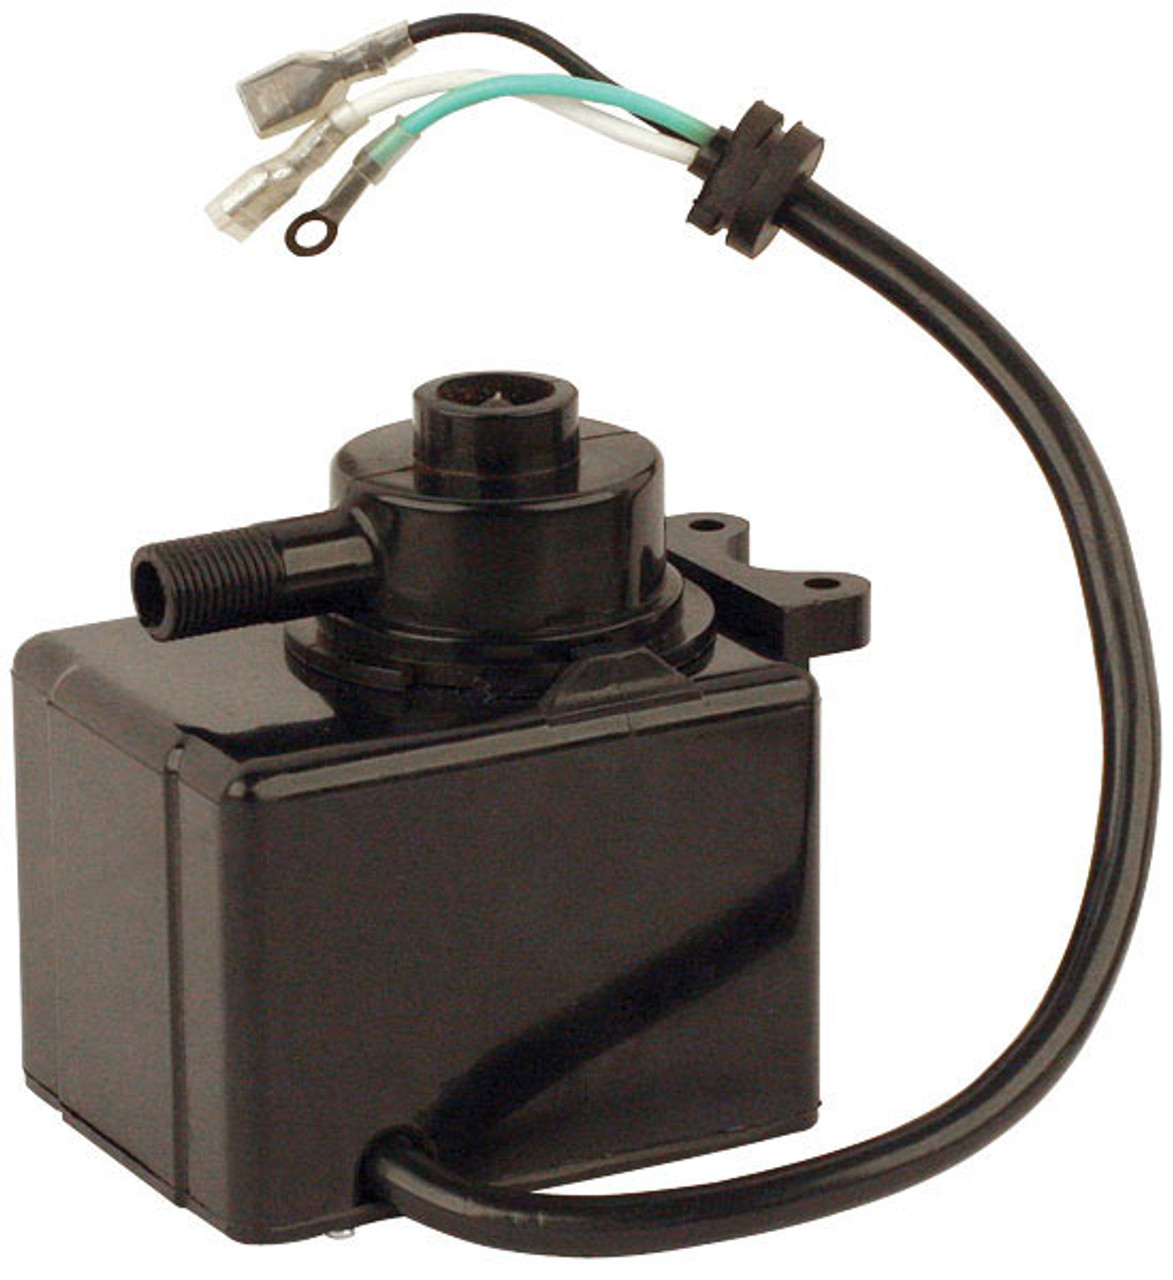 85-525-052      REPLACEMENT PUMP FOR 20GAL PARTS WASHER - TTC